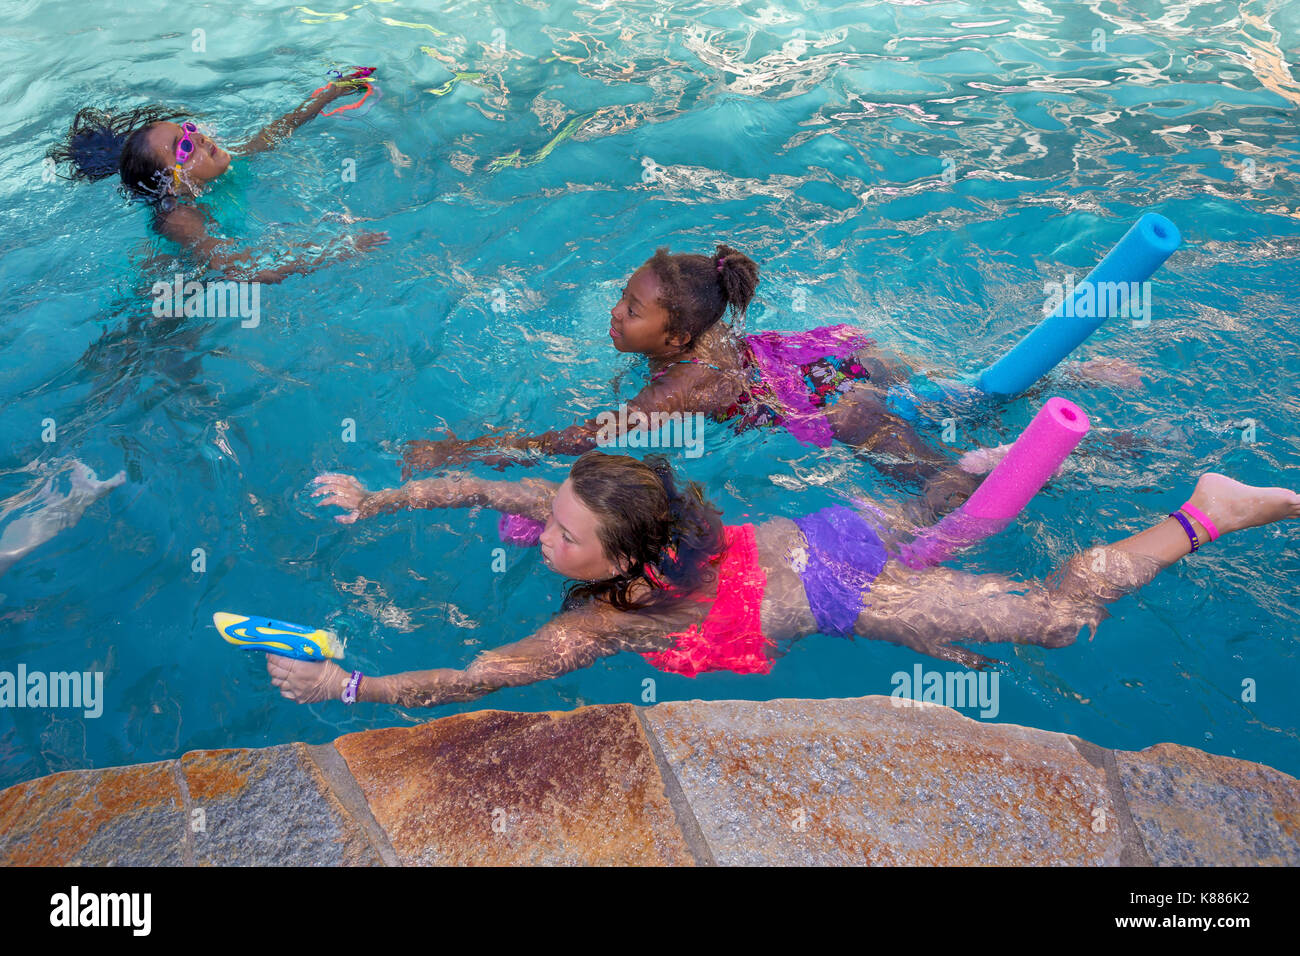 girls, children, playing, squirting water soaker, swimming pool, freshwater swimming pool, pool party, Castro Valley, Alameda County, California, Unit Stock Photo